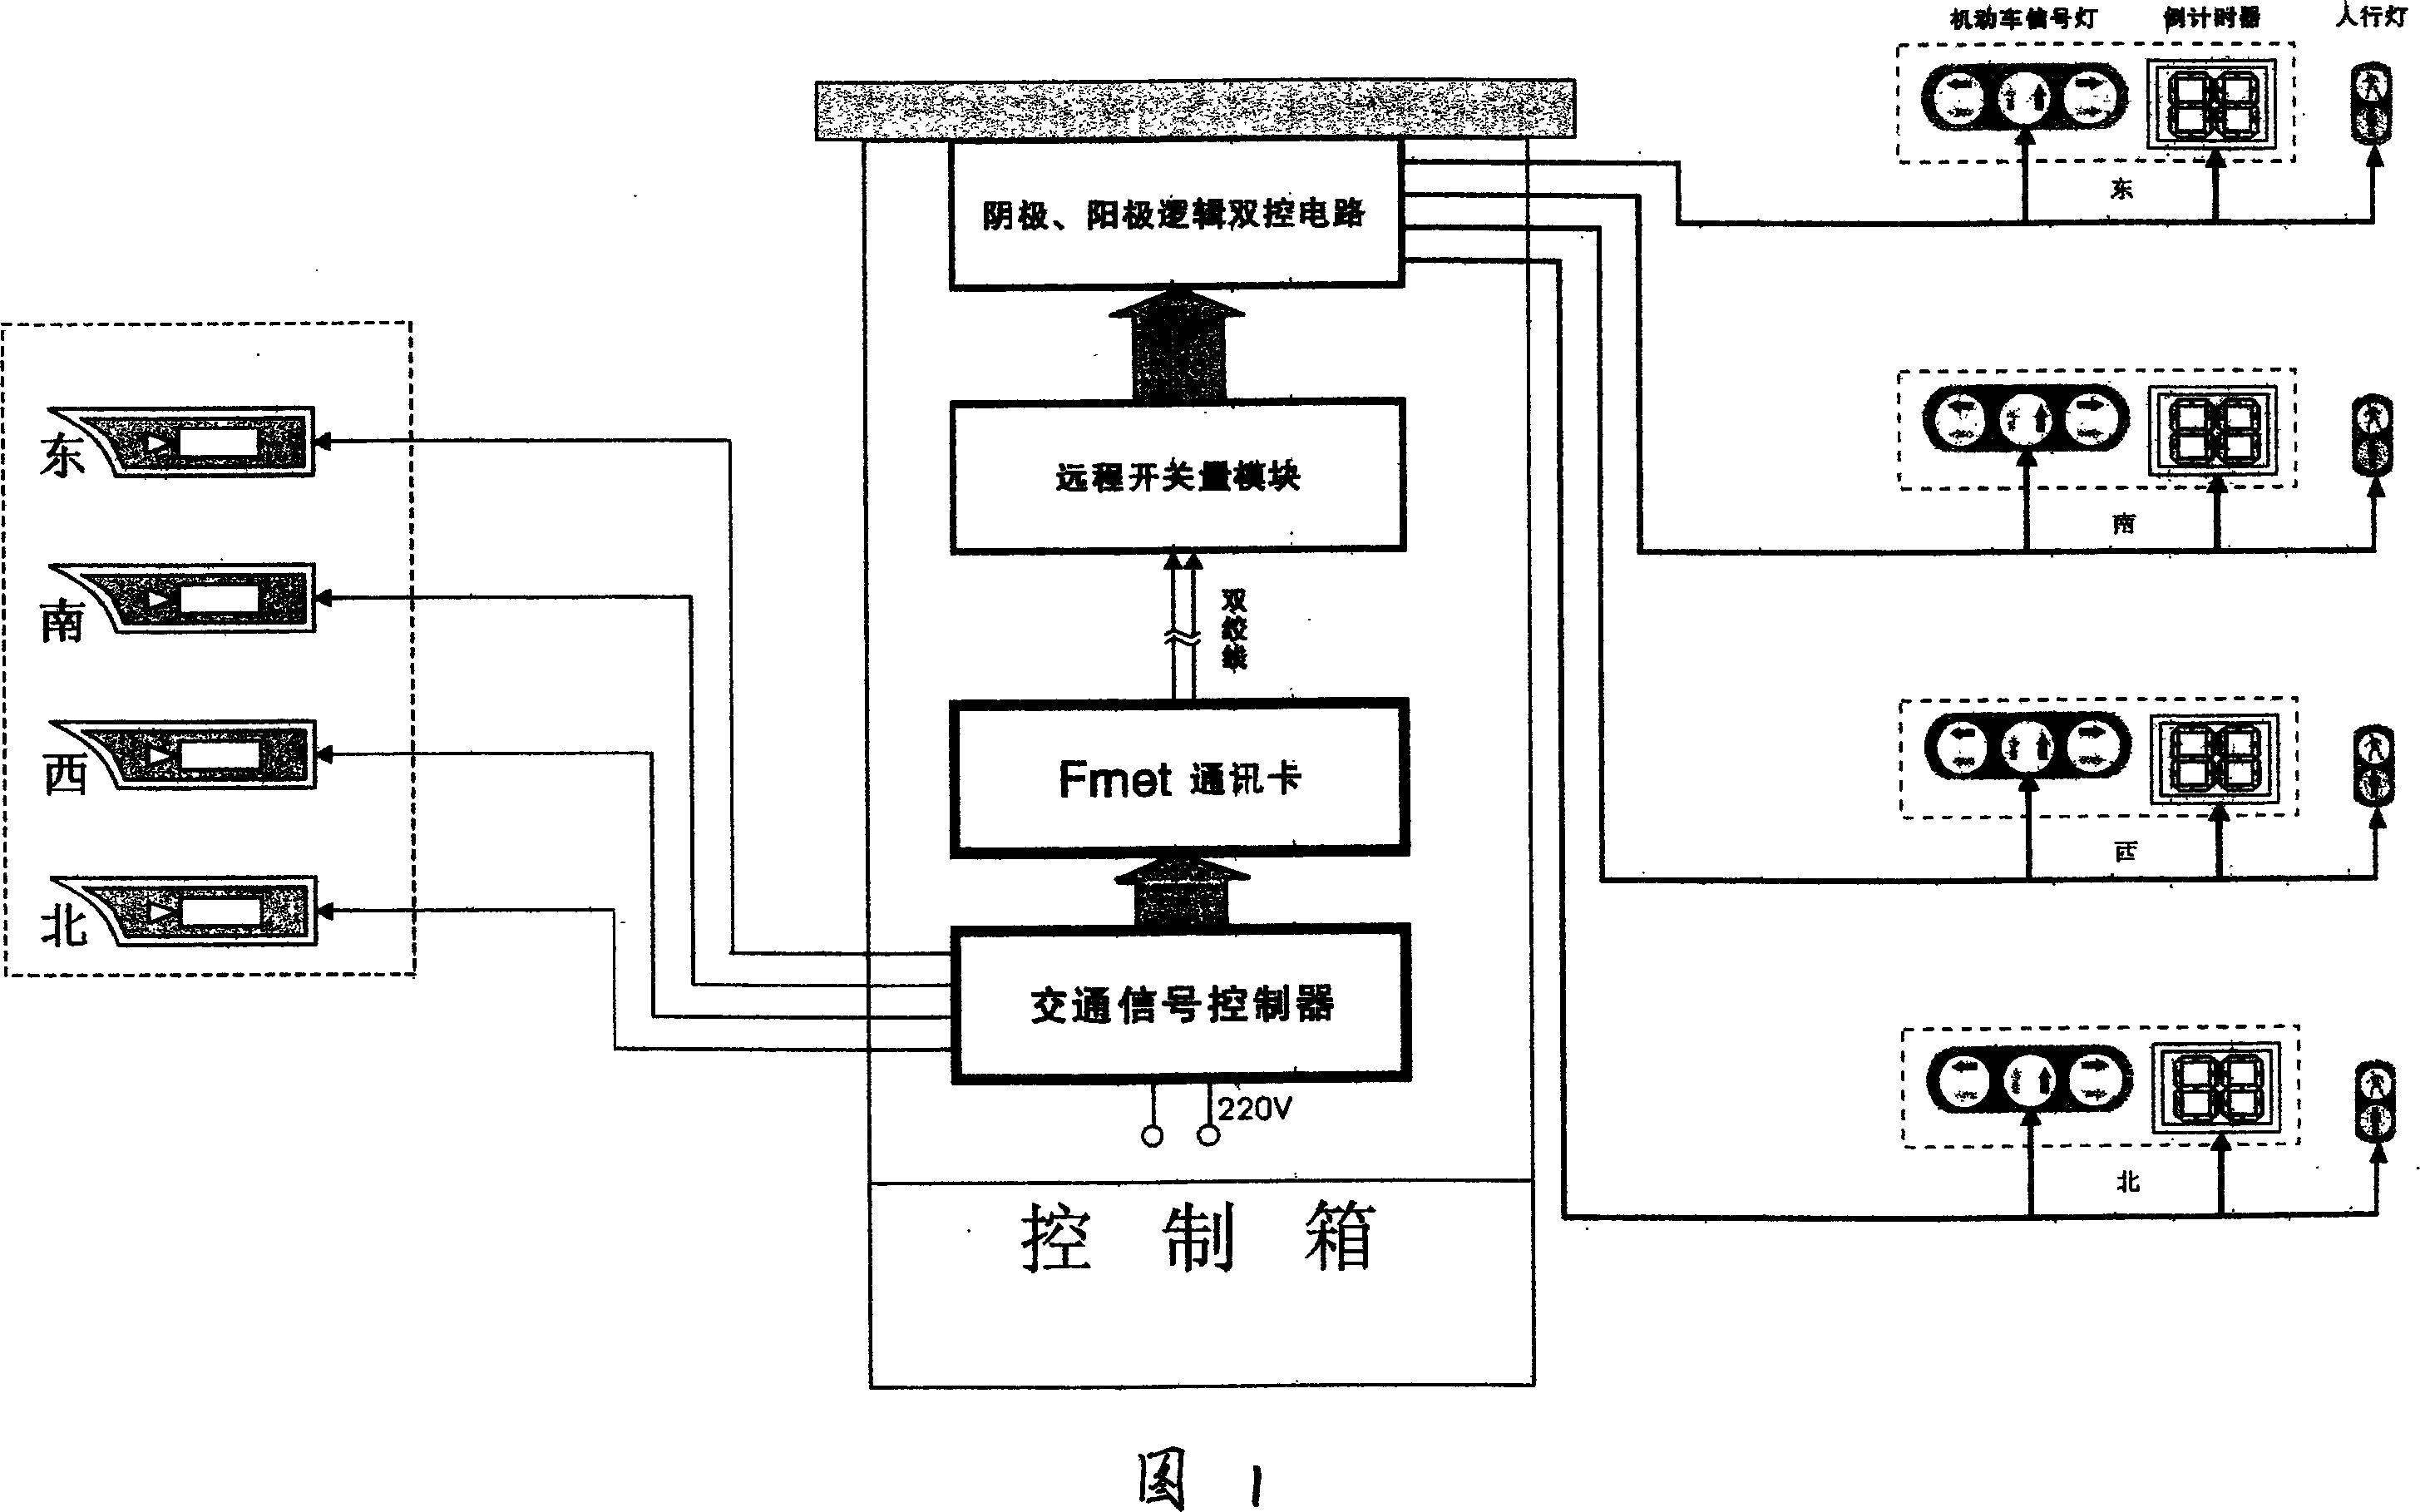 Real-time synchronized control method and system for no-protocol traffic lights and reverse-timing